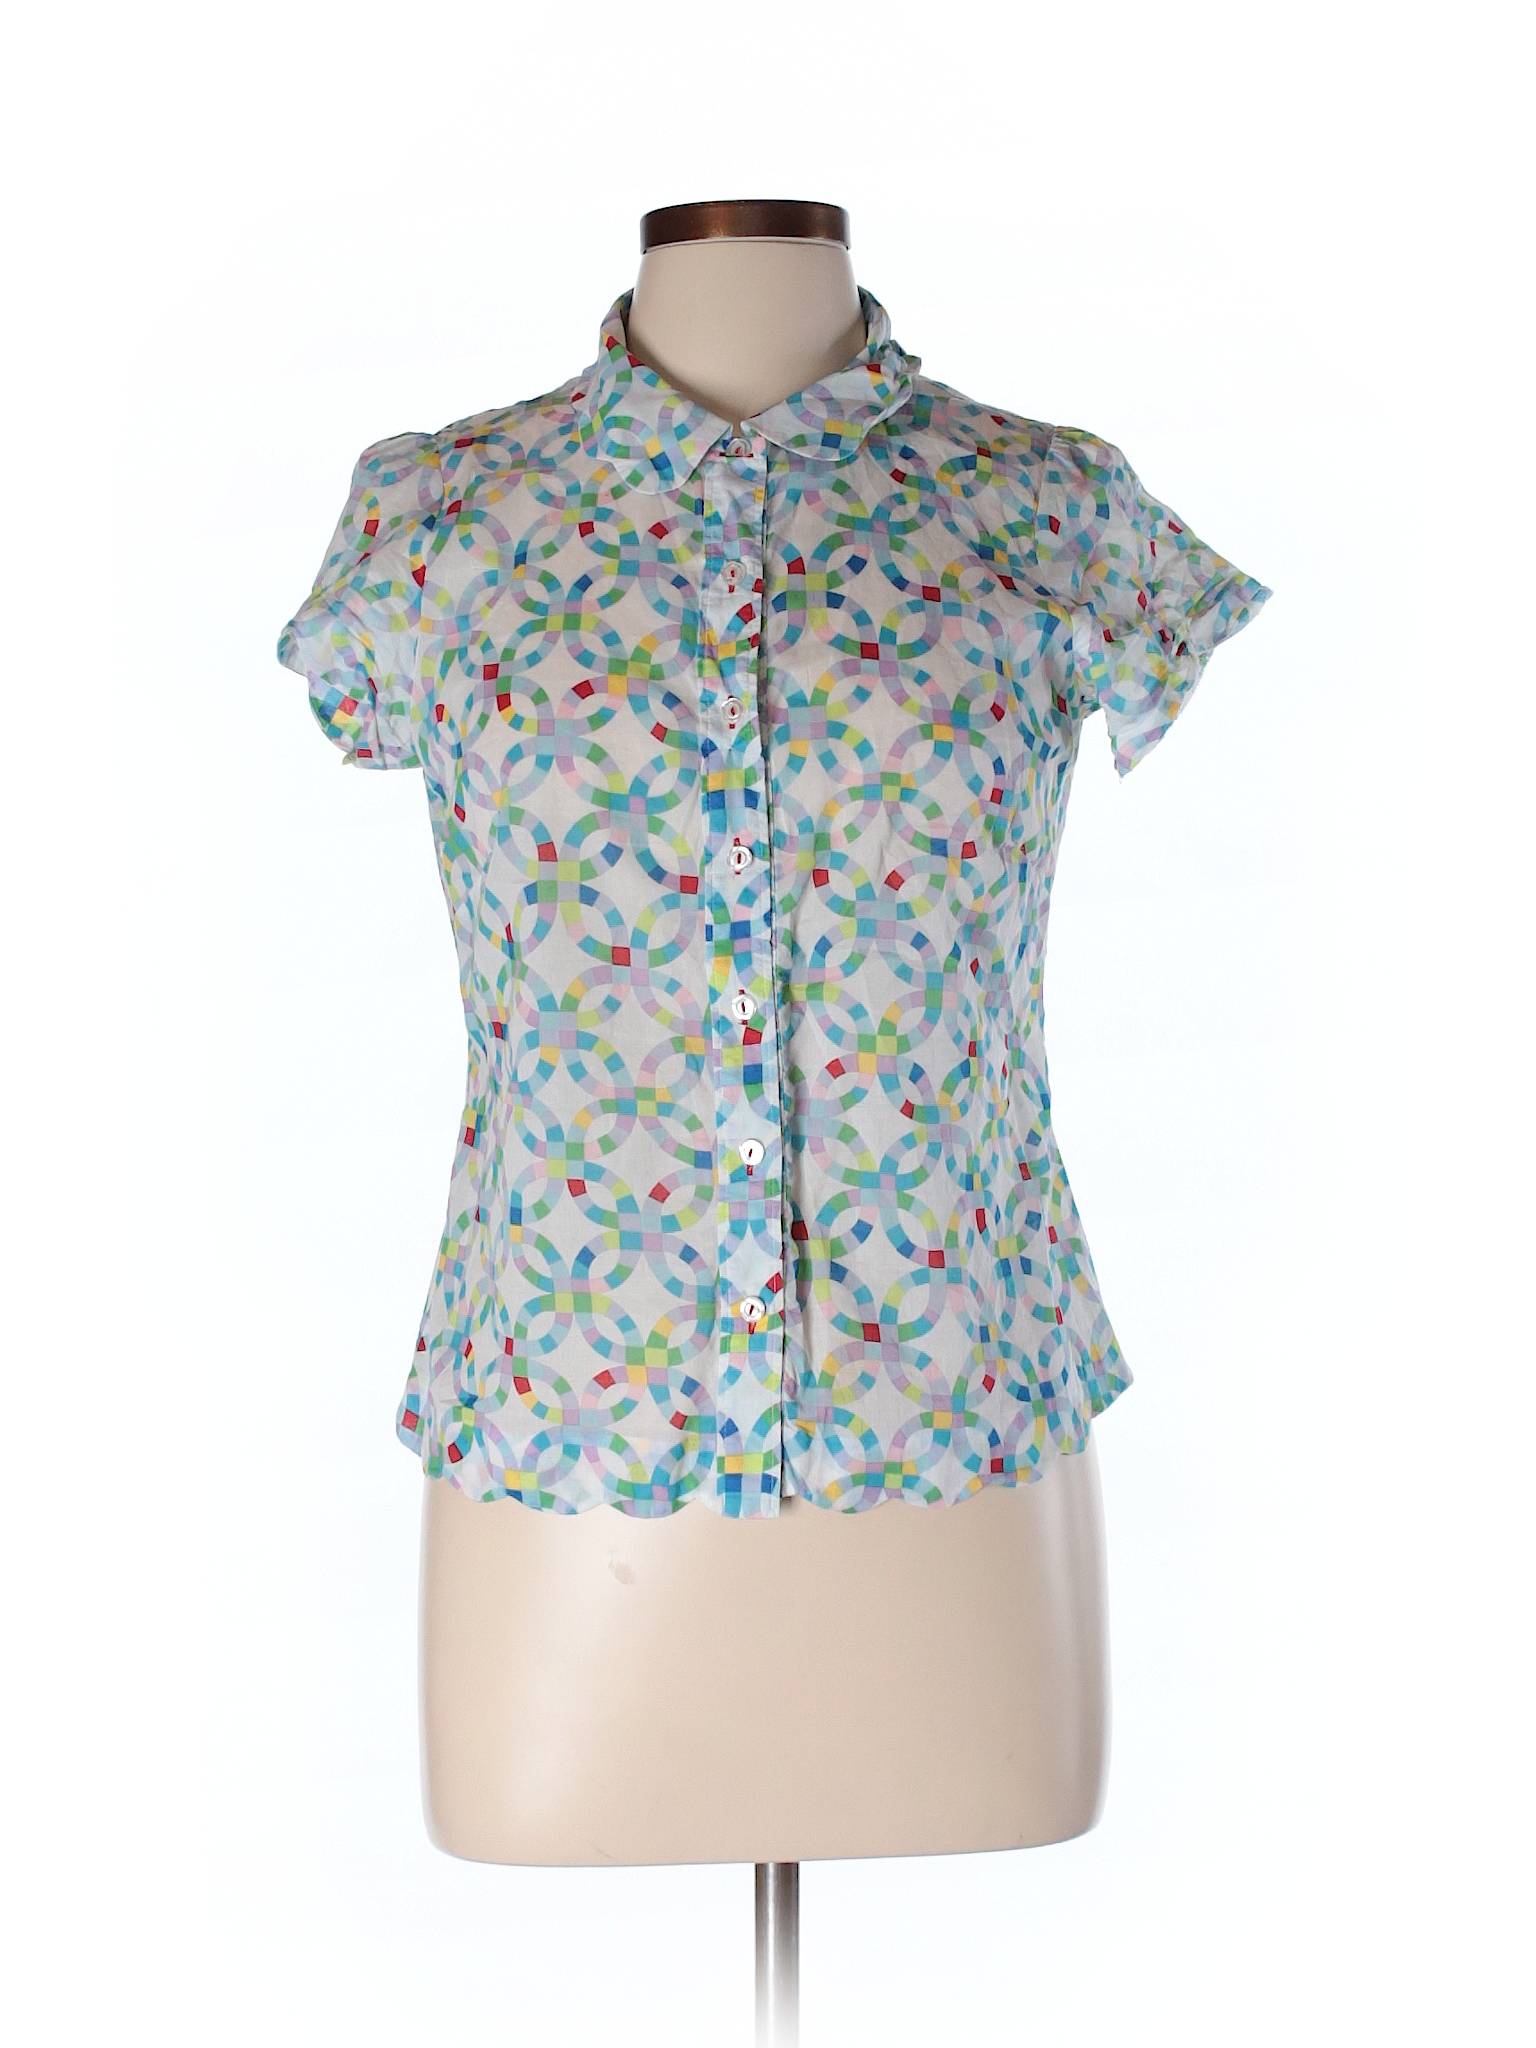 Odille 100% Cotton Print White Short Sleeve Blouse Size 10 - 73% off ...